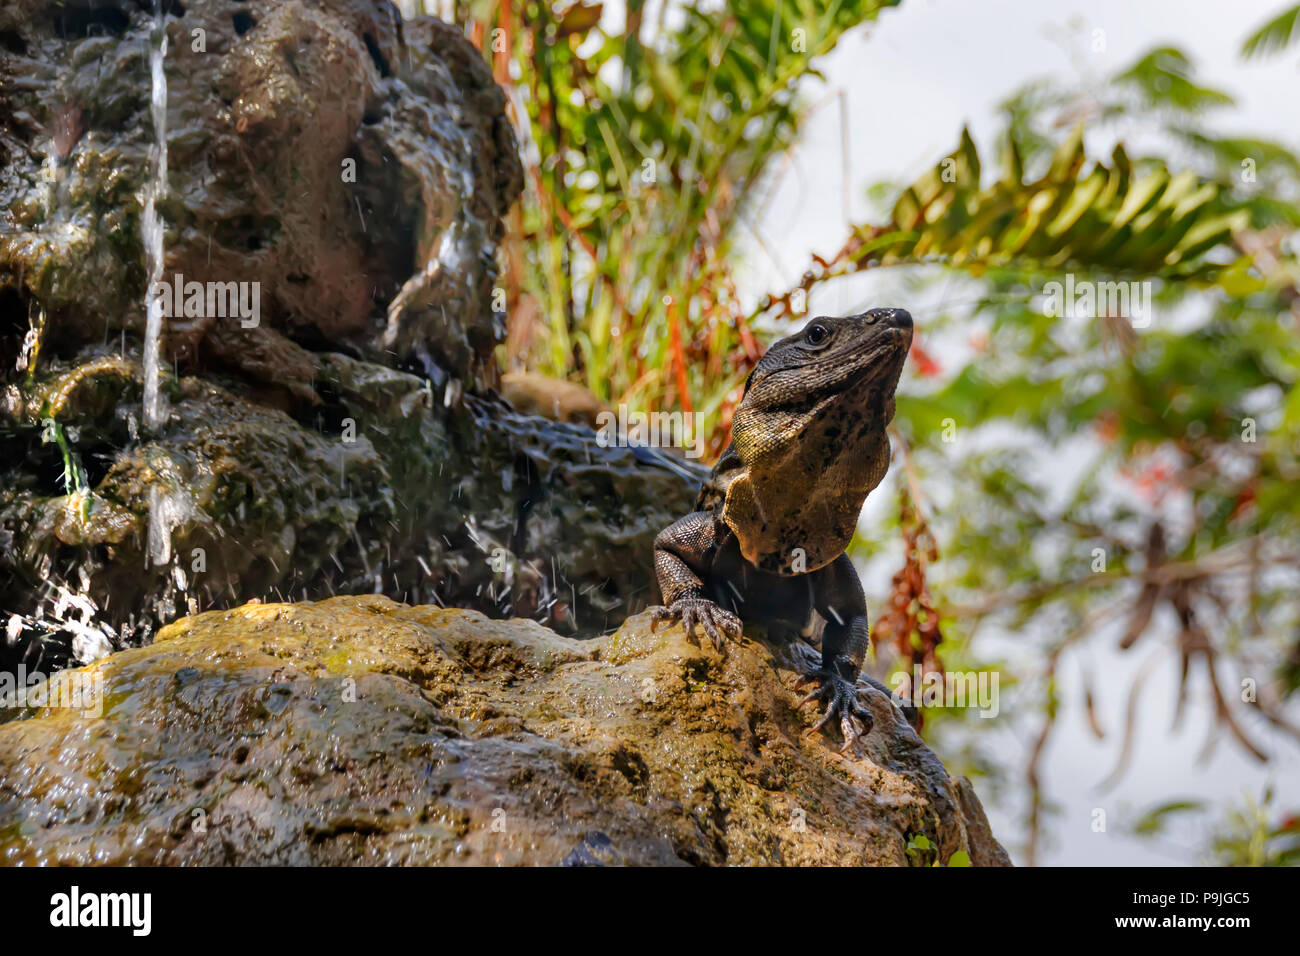 A large lizard sitting on a rock cliff Stock Photo